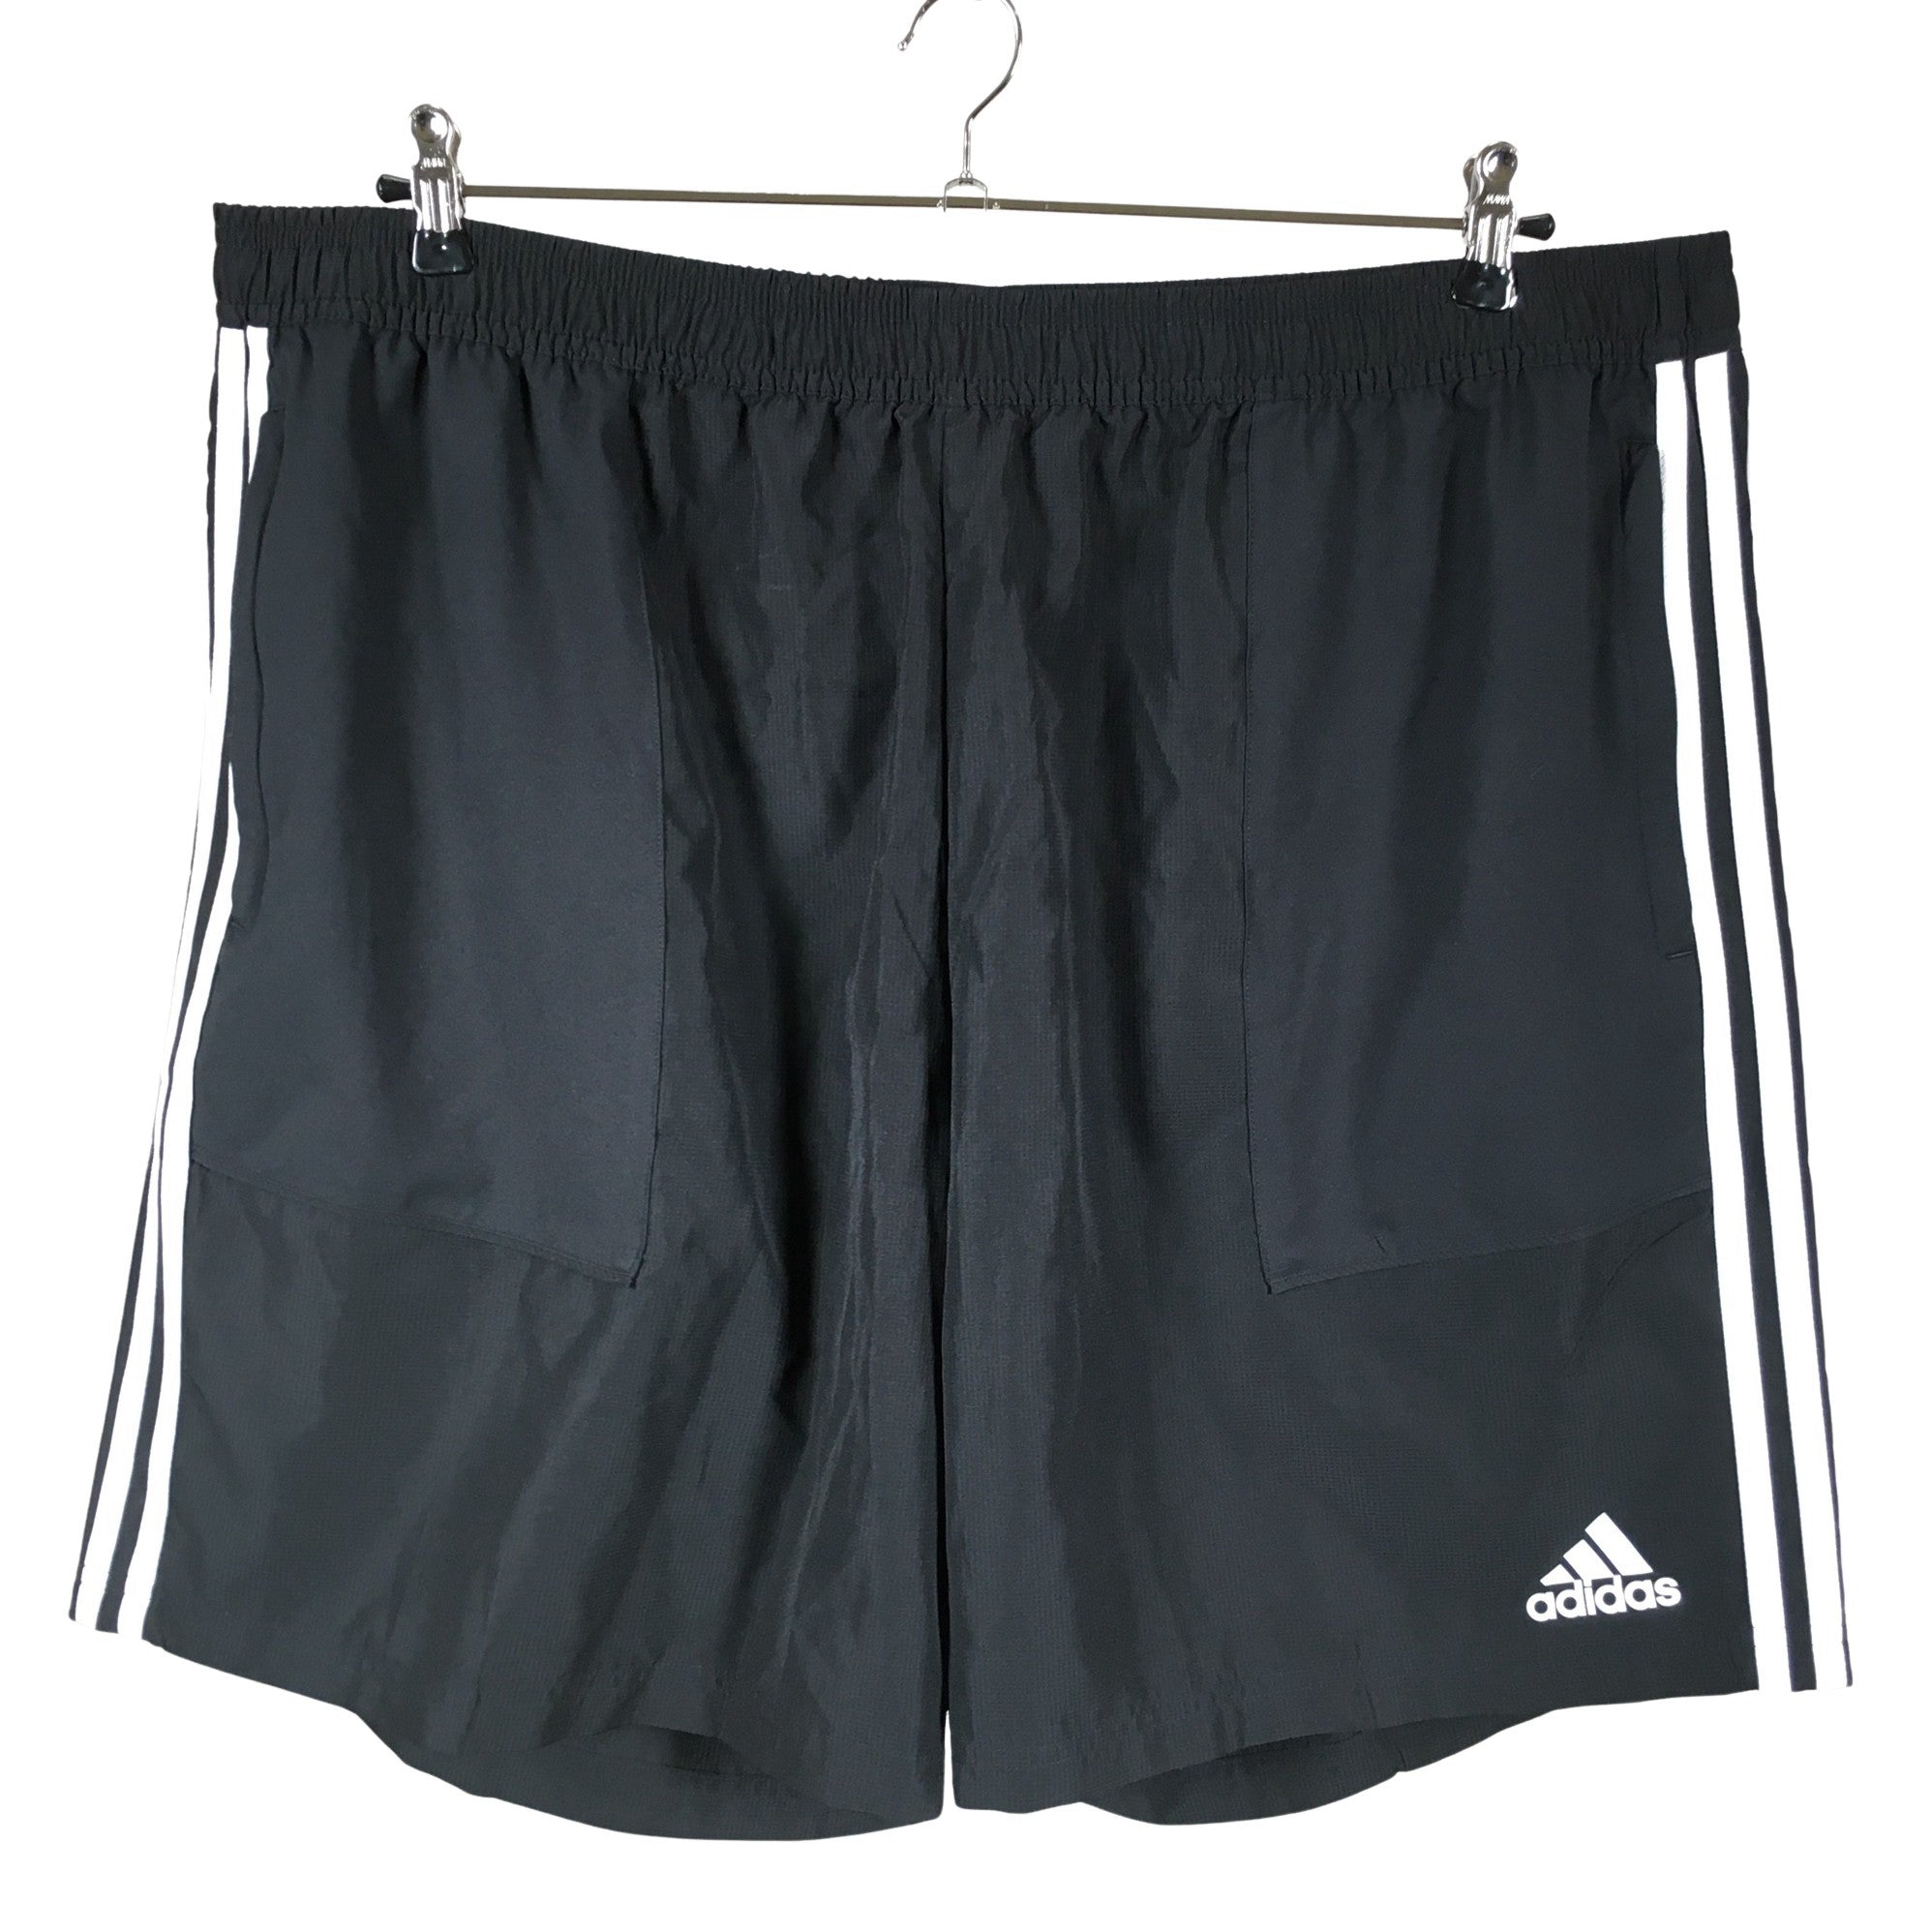 Men's Clothing Sale | Get Up to 70% Off at adidas Men Clothing Outlet